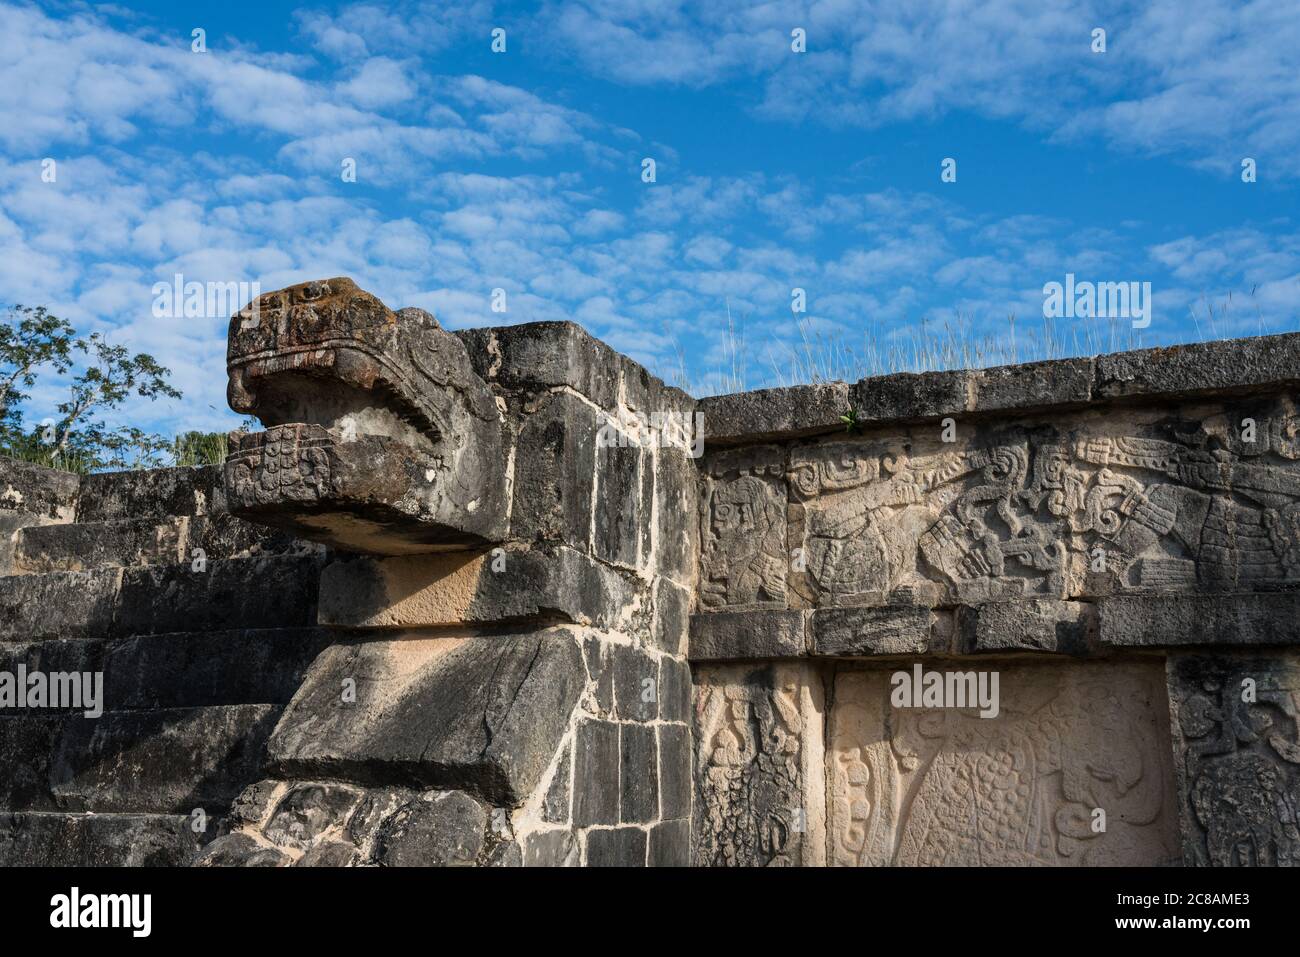 The Platform of the Eagles and Jaguars, built in Maya-Toltec style, in the ruins of the great  Mayan city of Chichen Itza, Yucatan, Mexico.  The Pre-H Stock Photo